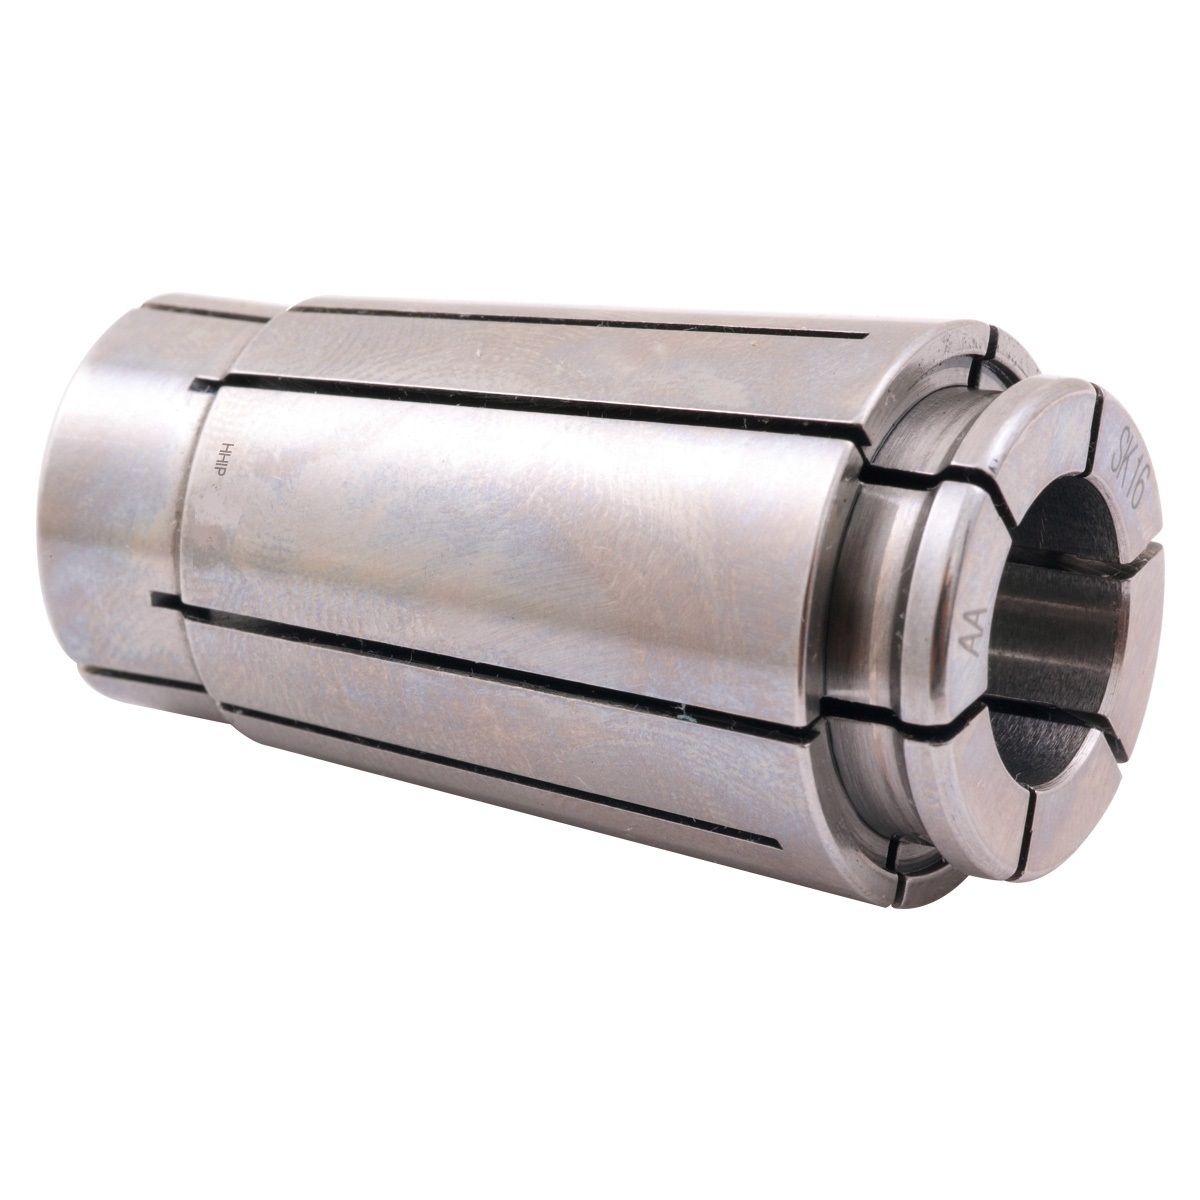 PRO-SERIES 3/8" SK16 LYNDEX STYLE COLLET (3901-5448)